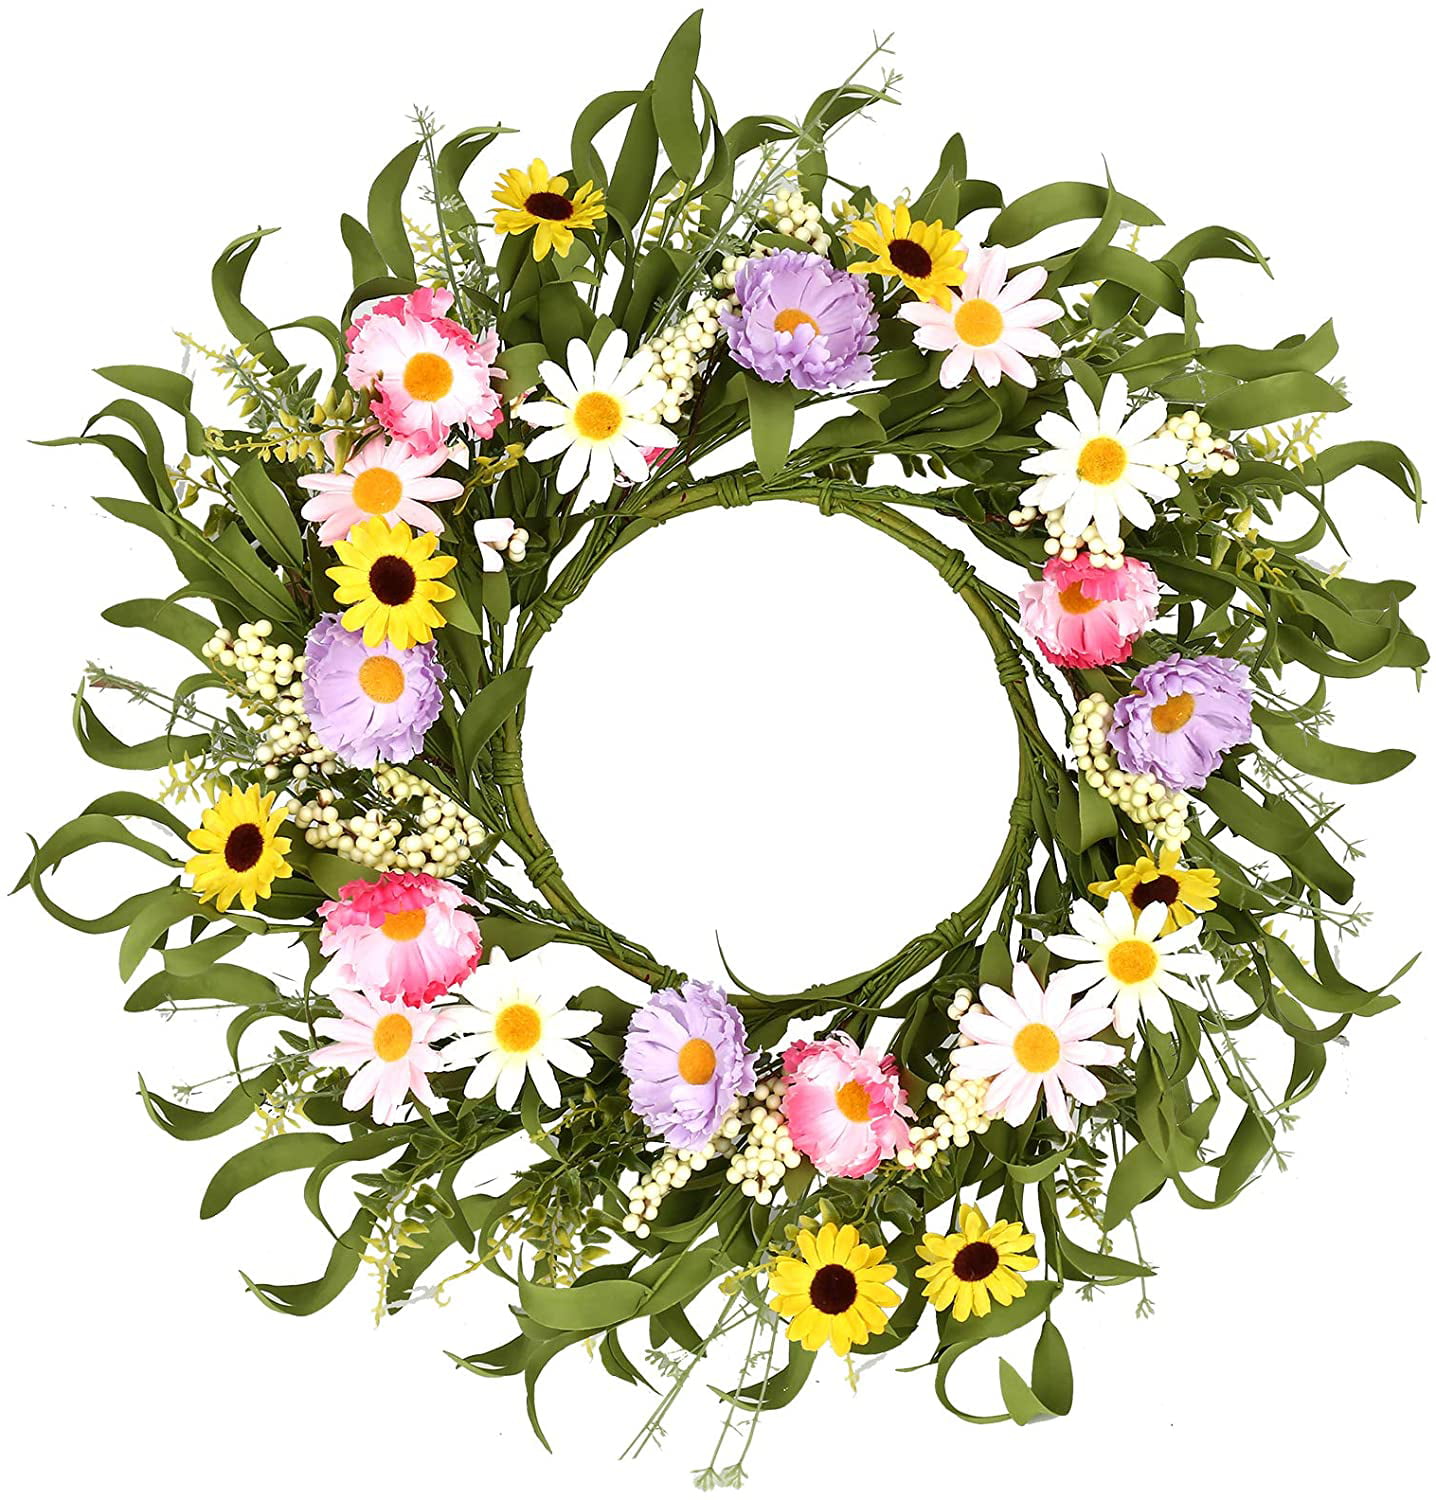 housewarming gift Summer door wreath from artificial flowers home and wedding decor foliage and berries in present box